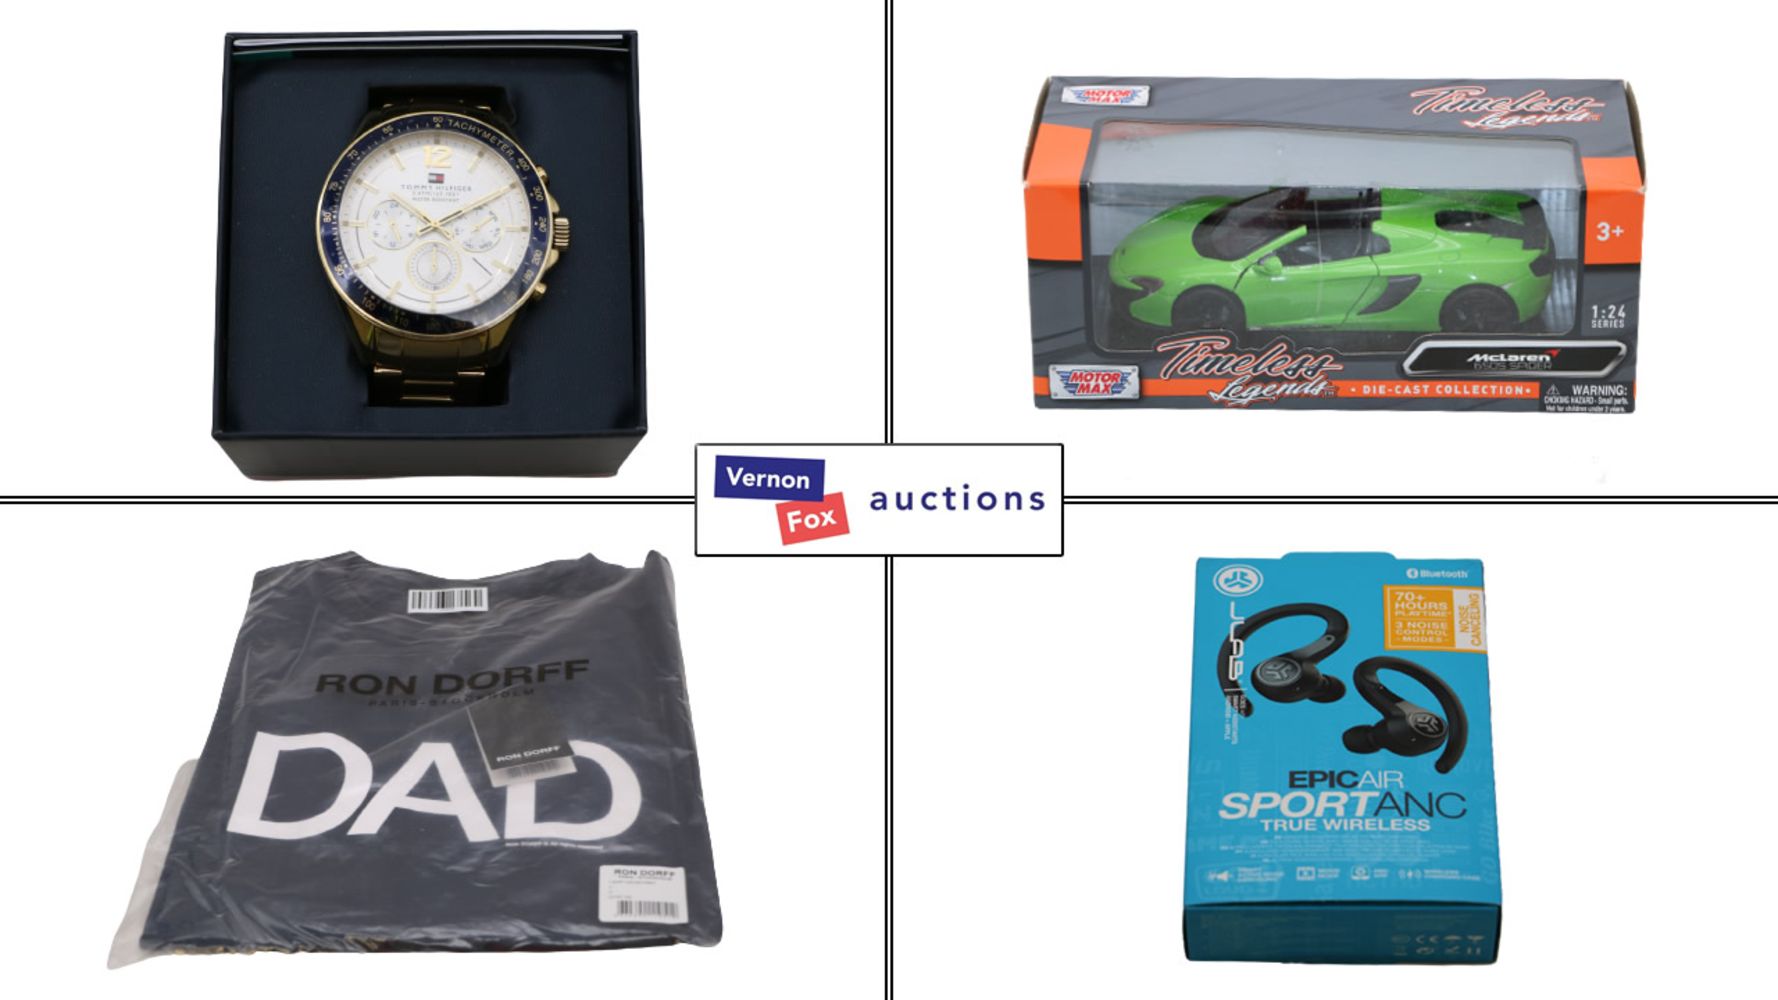 TIMED ONLINE AUCTION: Father's Day - A wide range of ideal Gifts, Sports Equipment, Clothing and other Commercial Goods, with FREE UK DELIVERY!